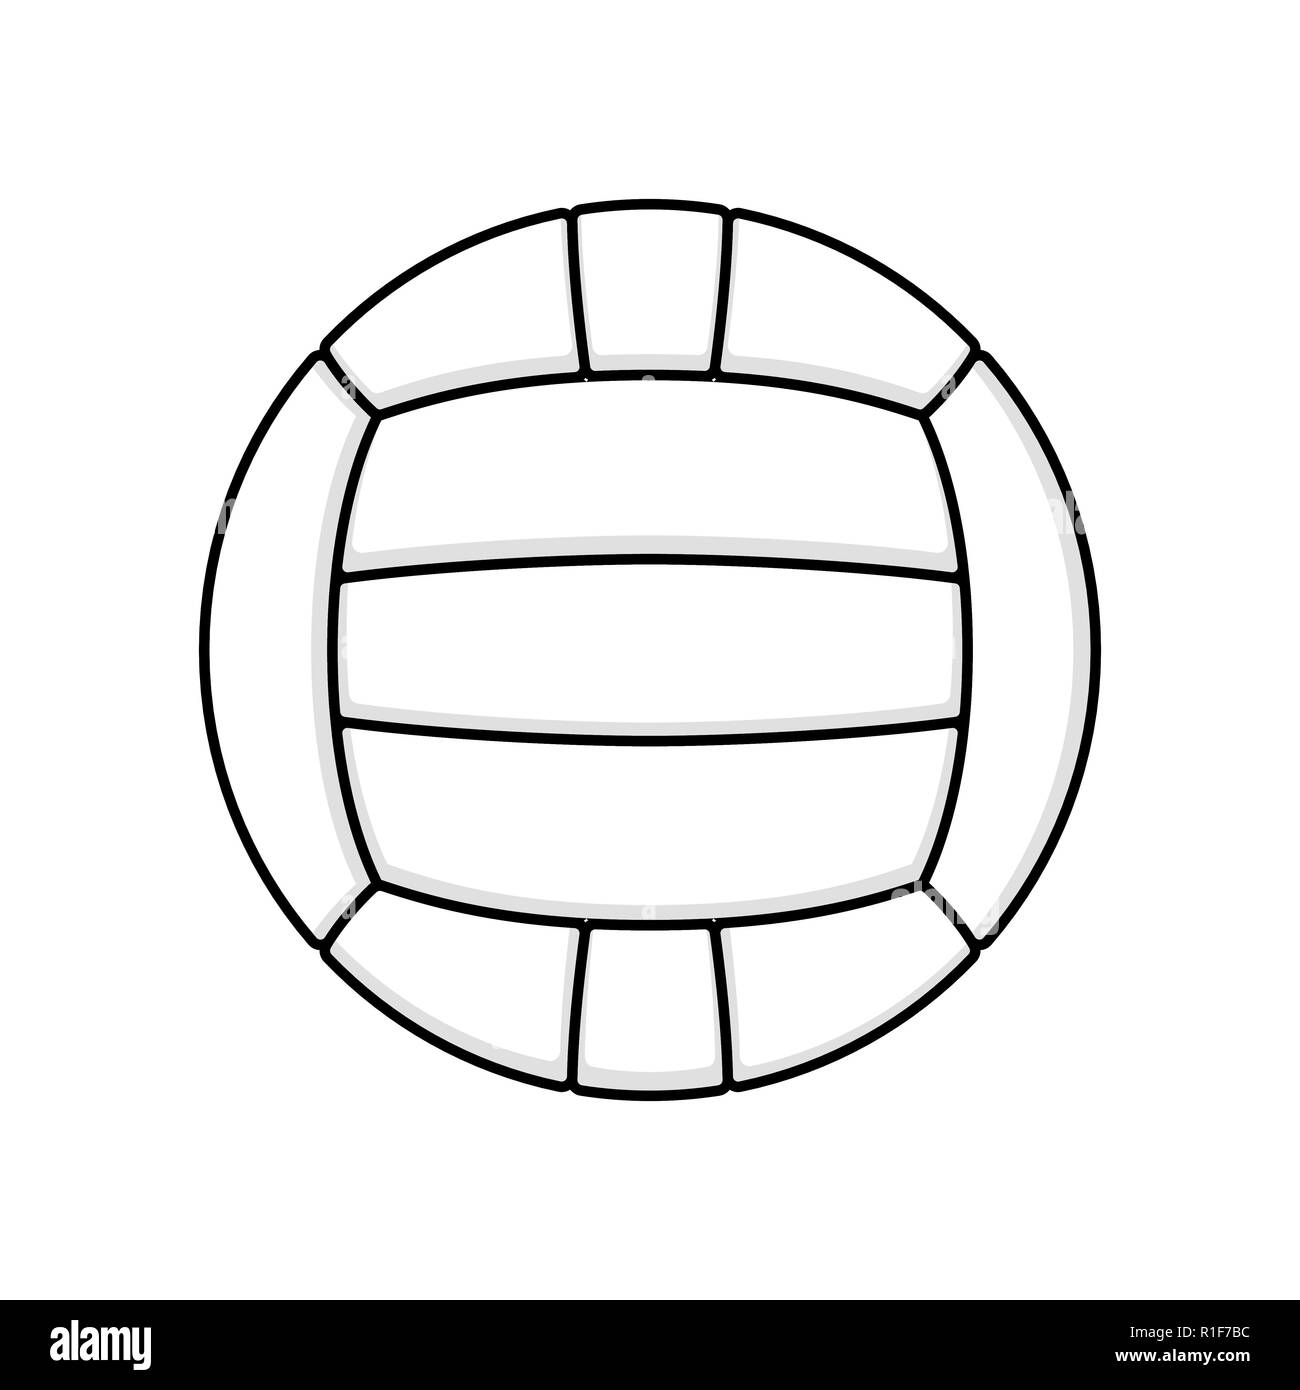 Outline volleyball silhouette with shadowa isolated on white background Stock Vector